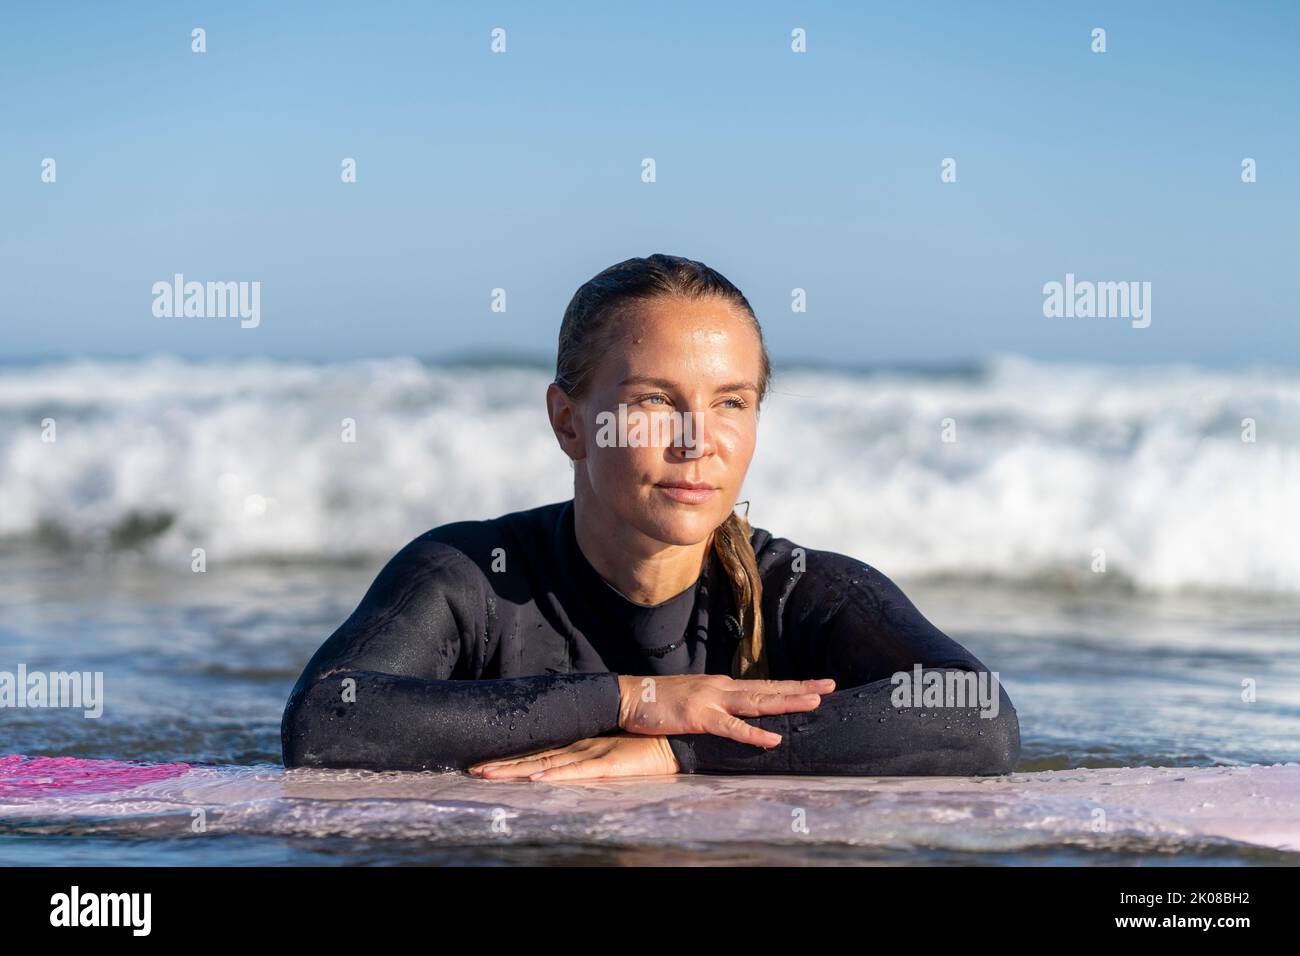 Surfer girl in the water looking at the waves with her surfboard. Female surfer woman Stock Photo